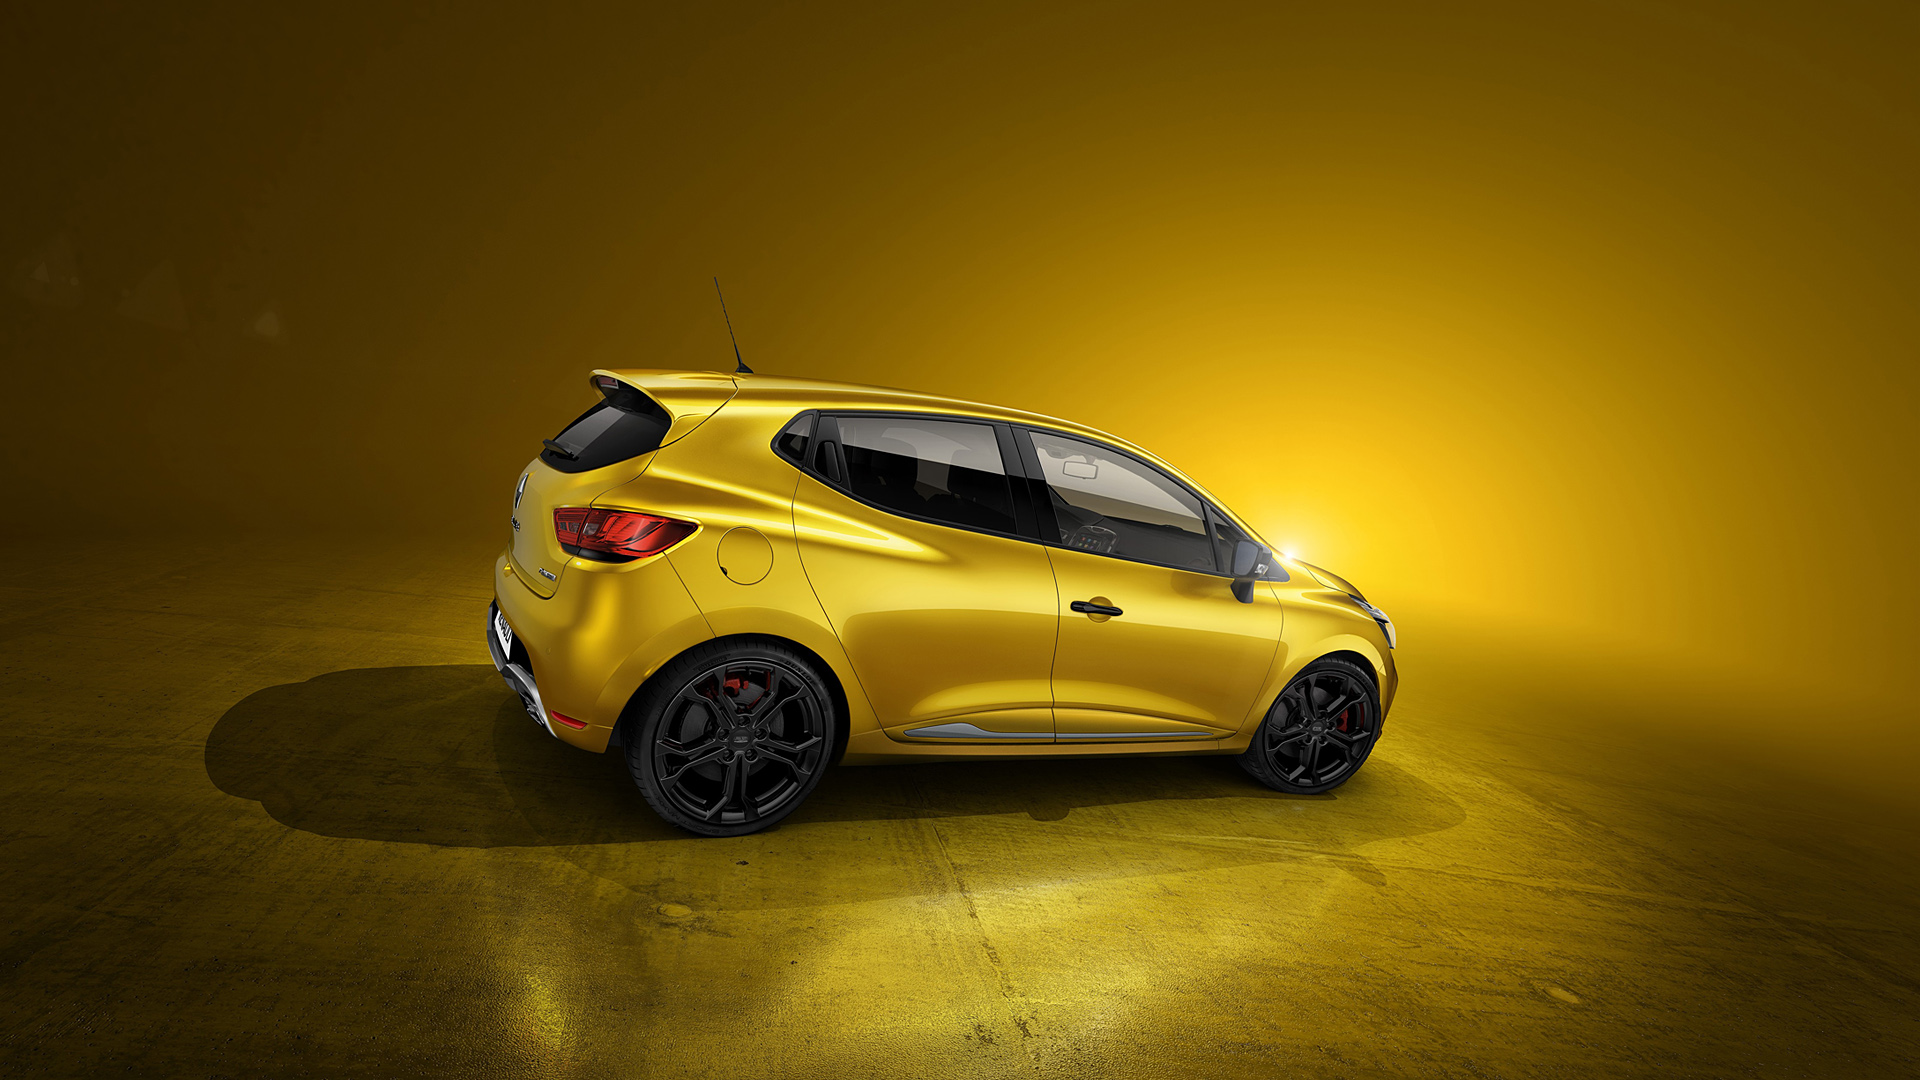  2013 Renault Clio RS 200 Wallpaper.